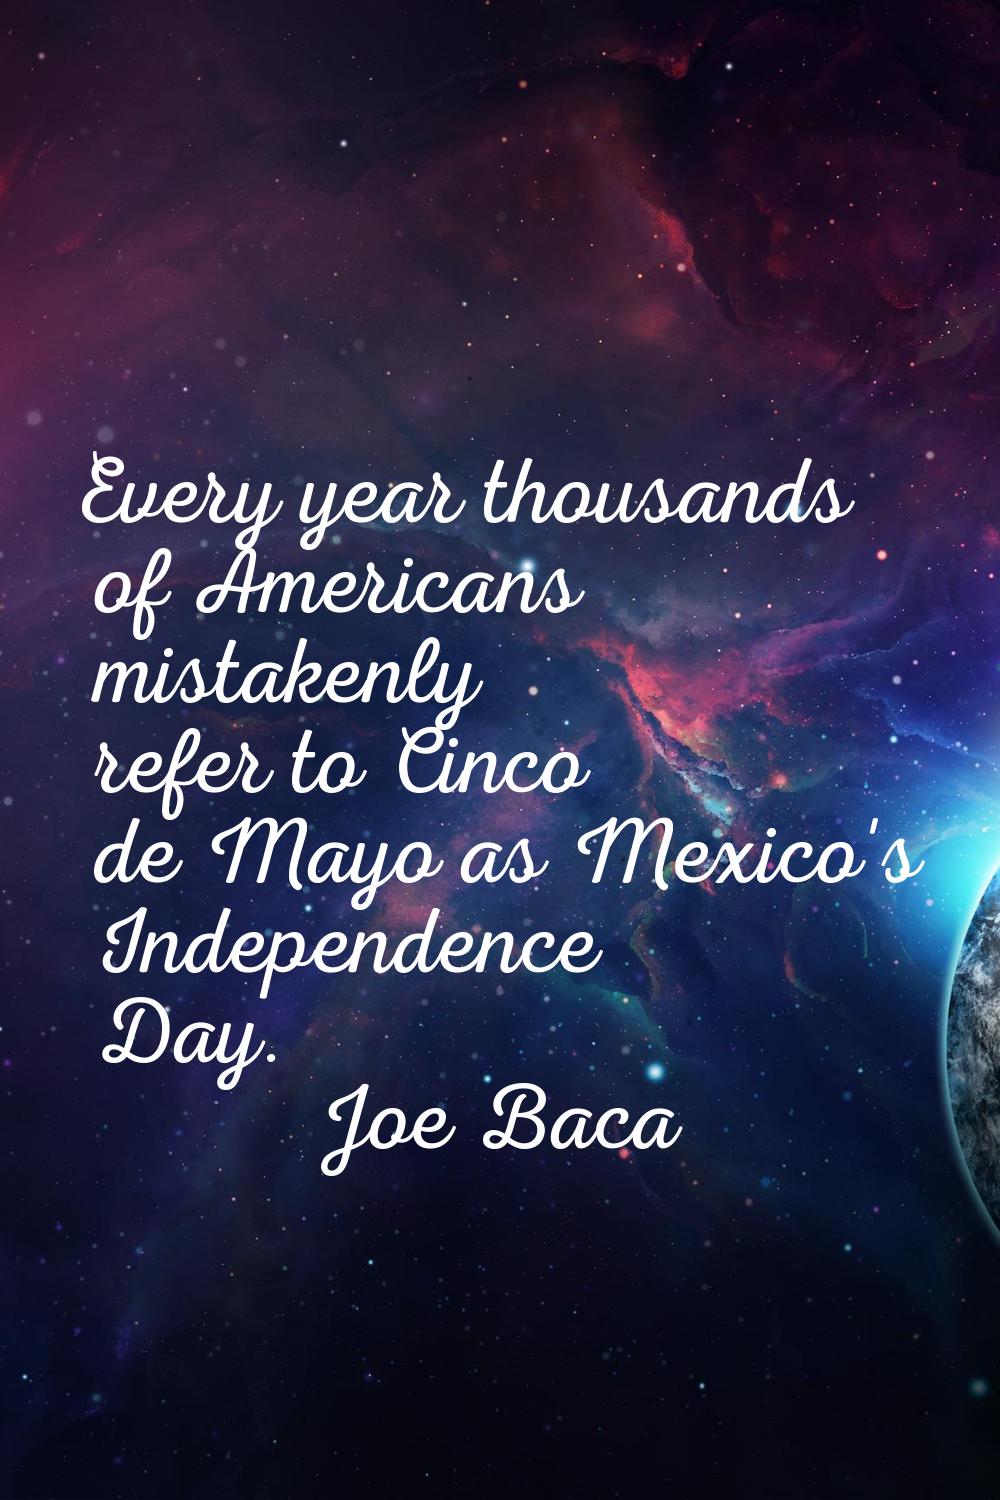 Every year thousands of Americans mistakenly refer to Cinco de Mayo as Mexico's Independence Day.